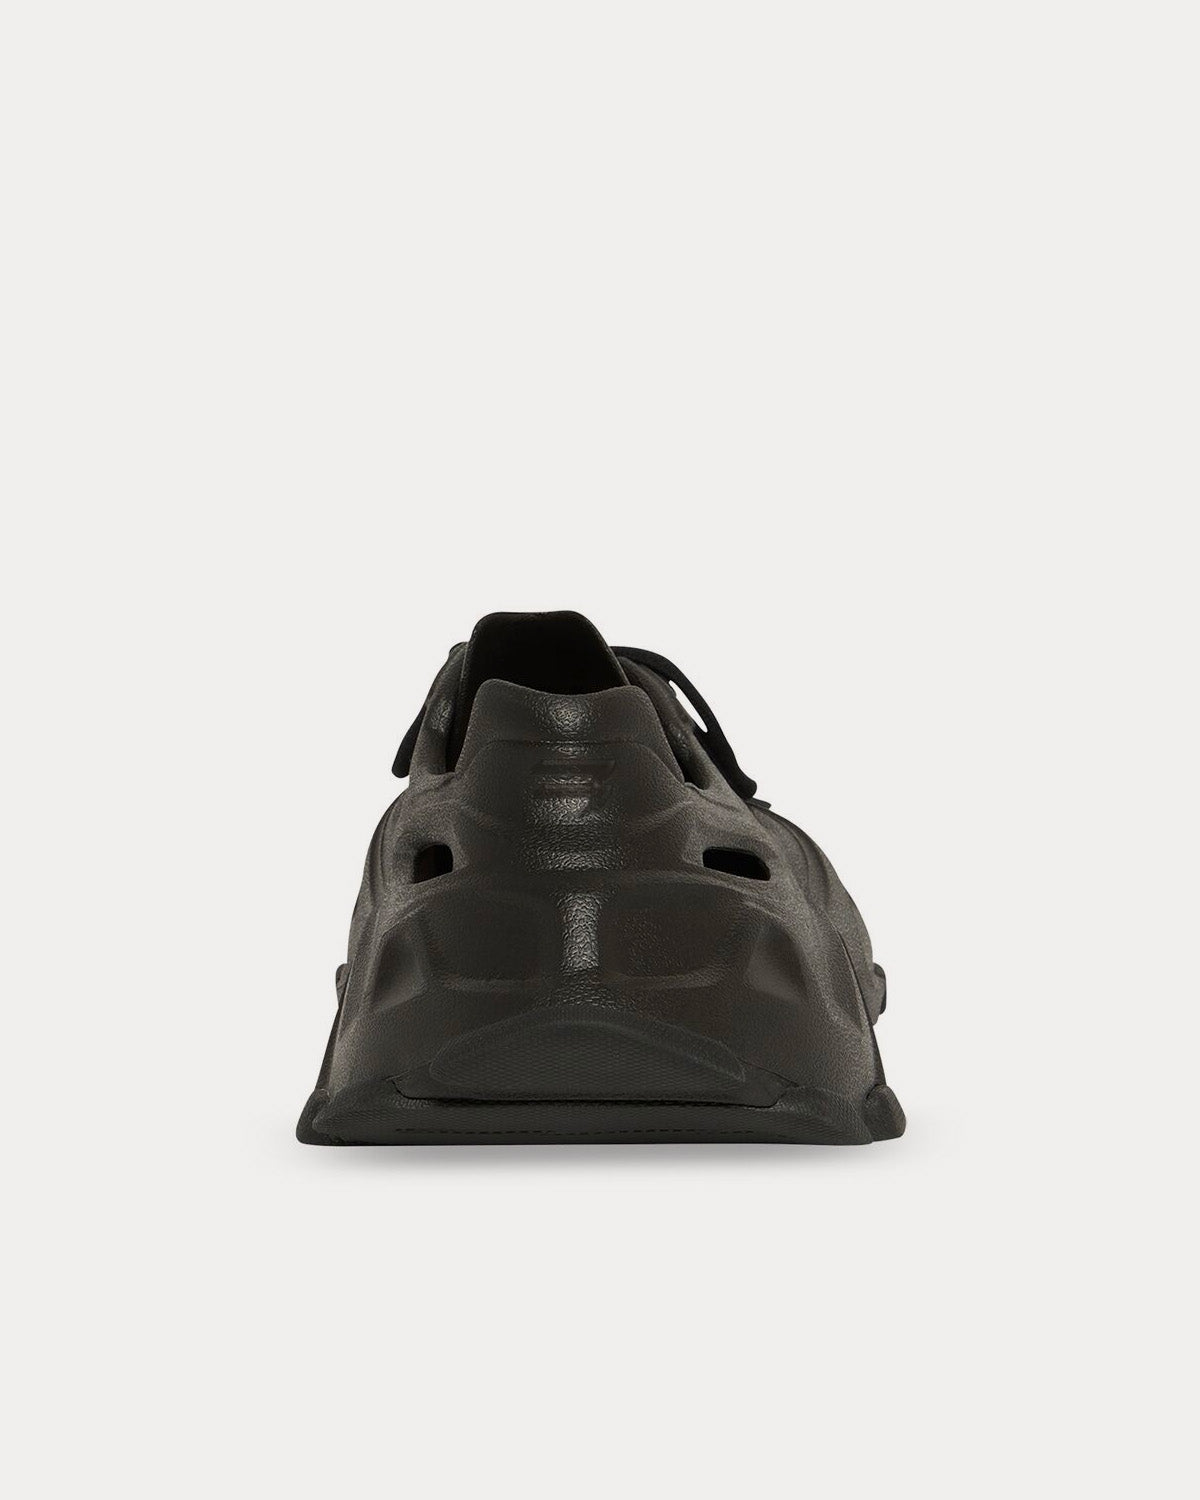 Balenciaga - HD Lace-Up Rubber Black Low Top Sneakers